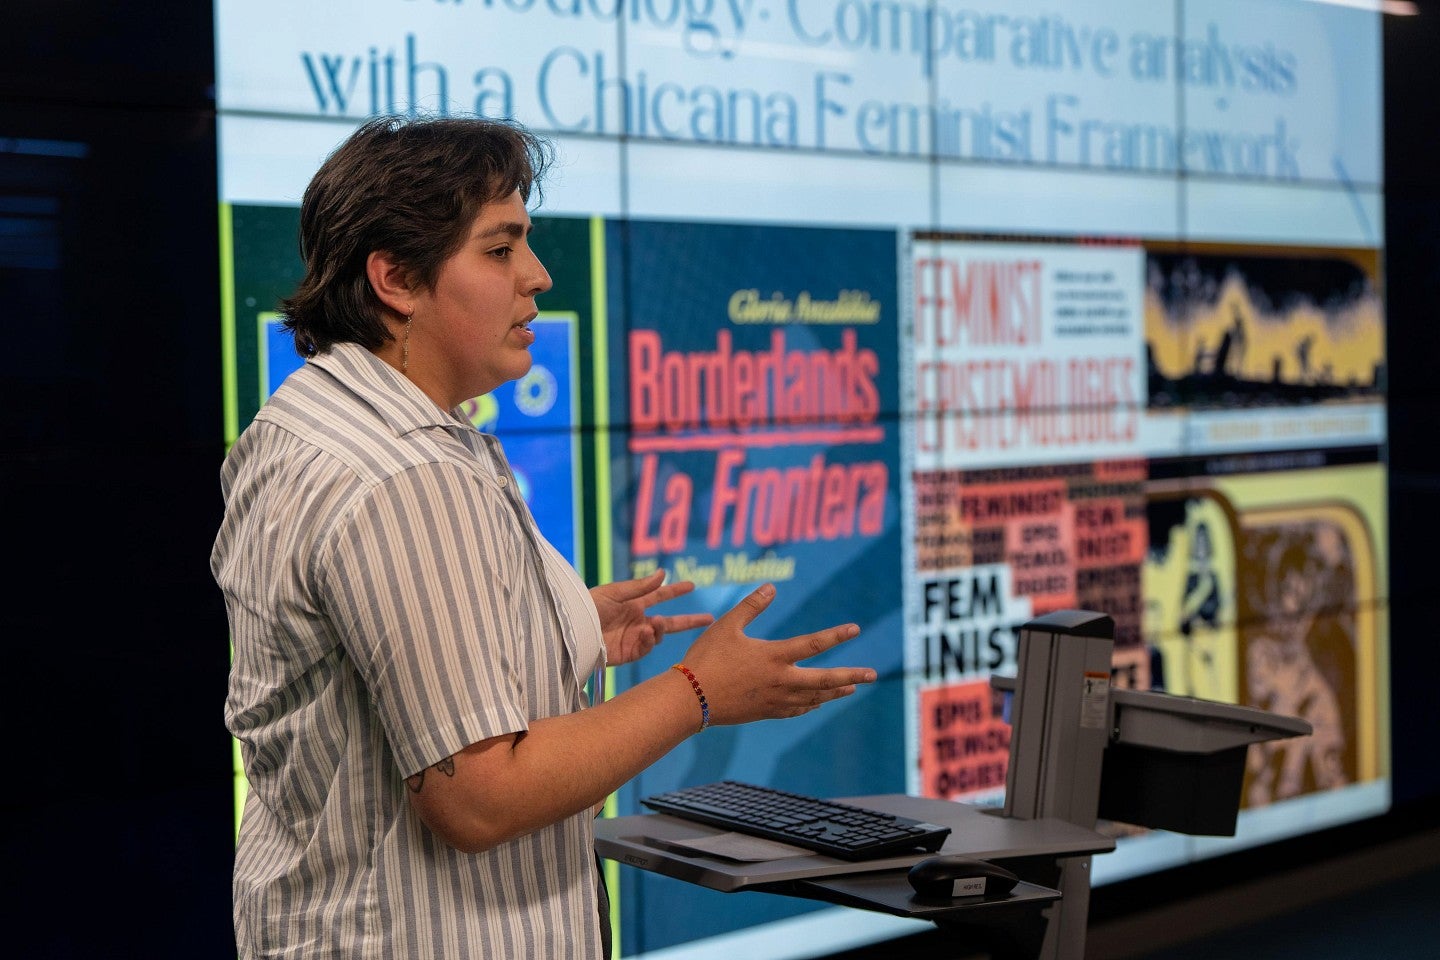 undergraduate student sharing research related to chicana feminism